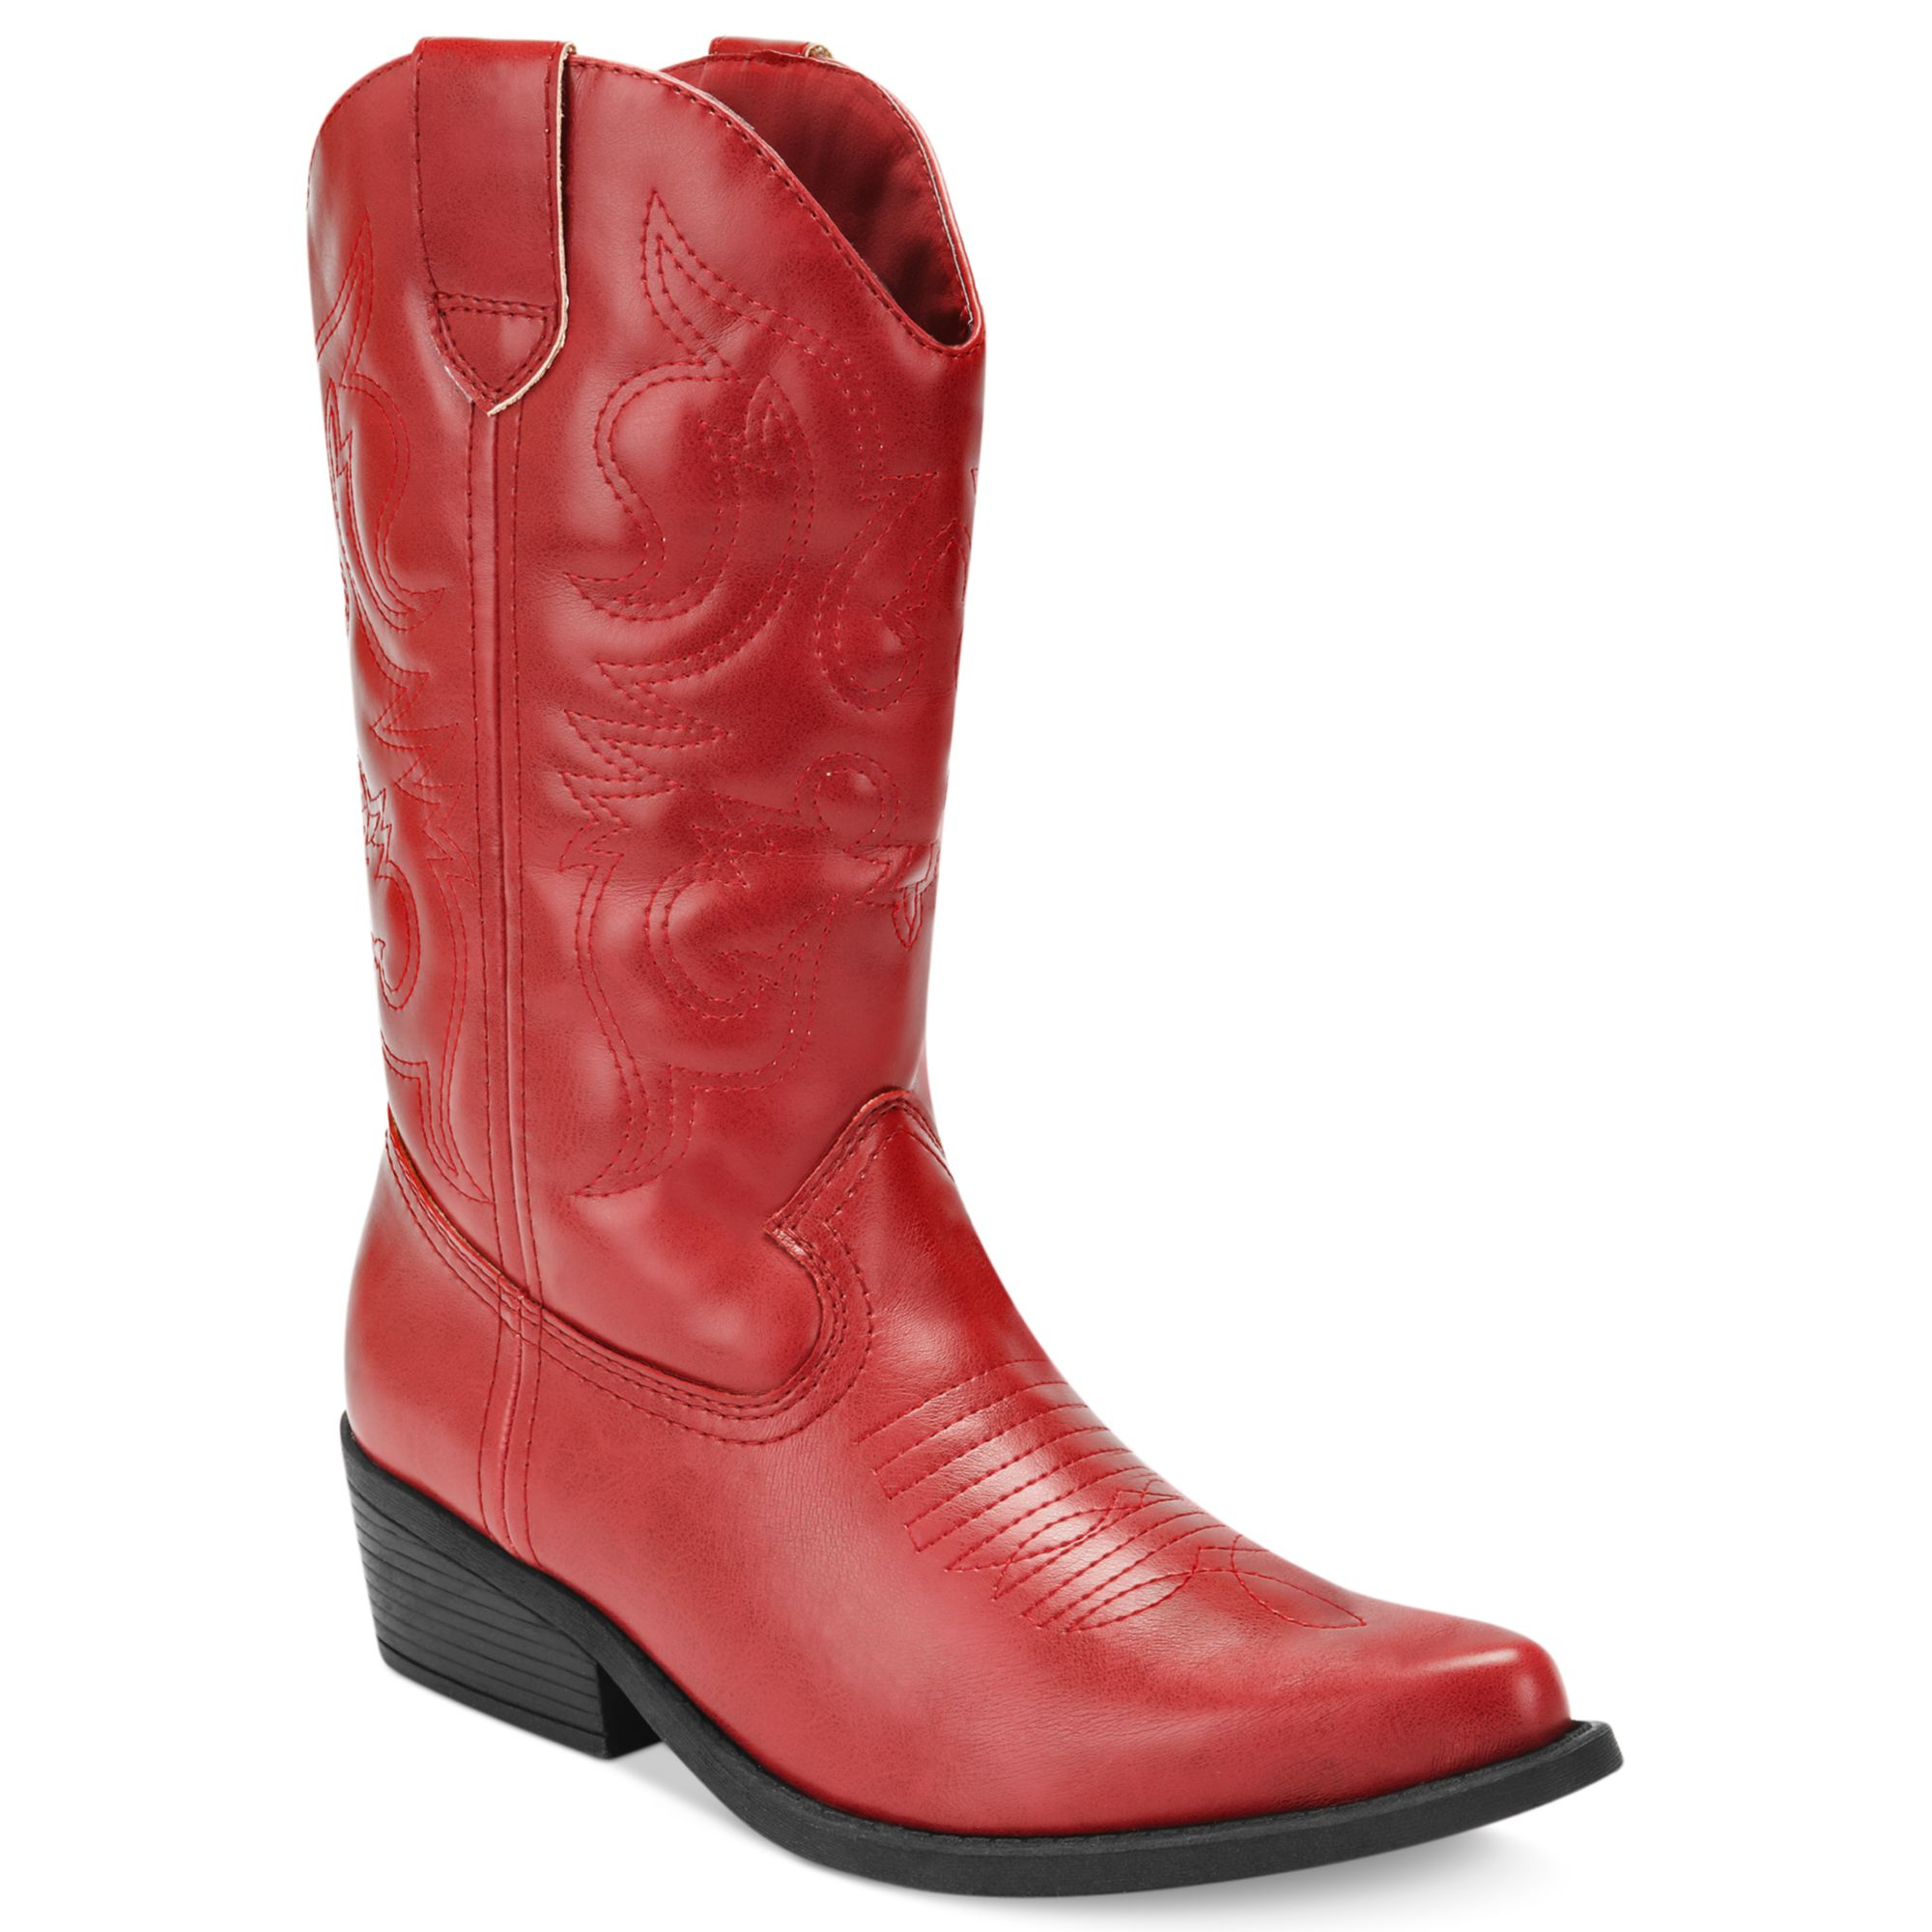 Rampage Wellington Cowboy Boots in Red 